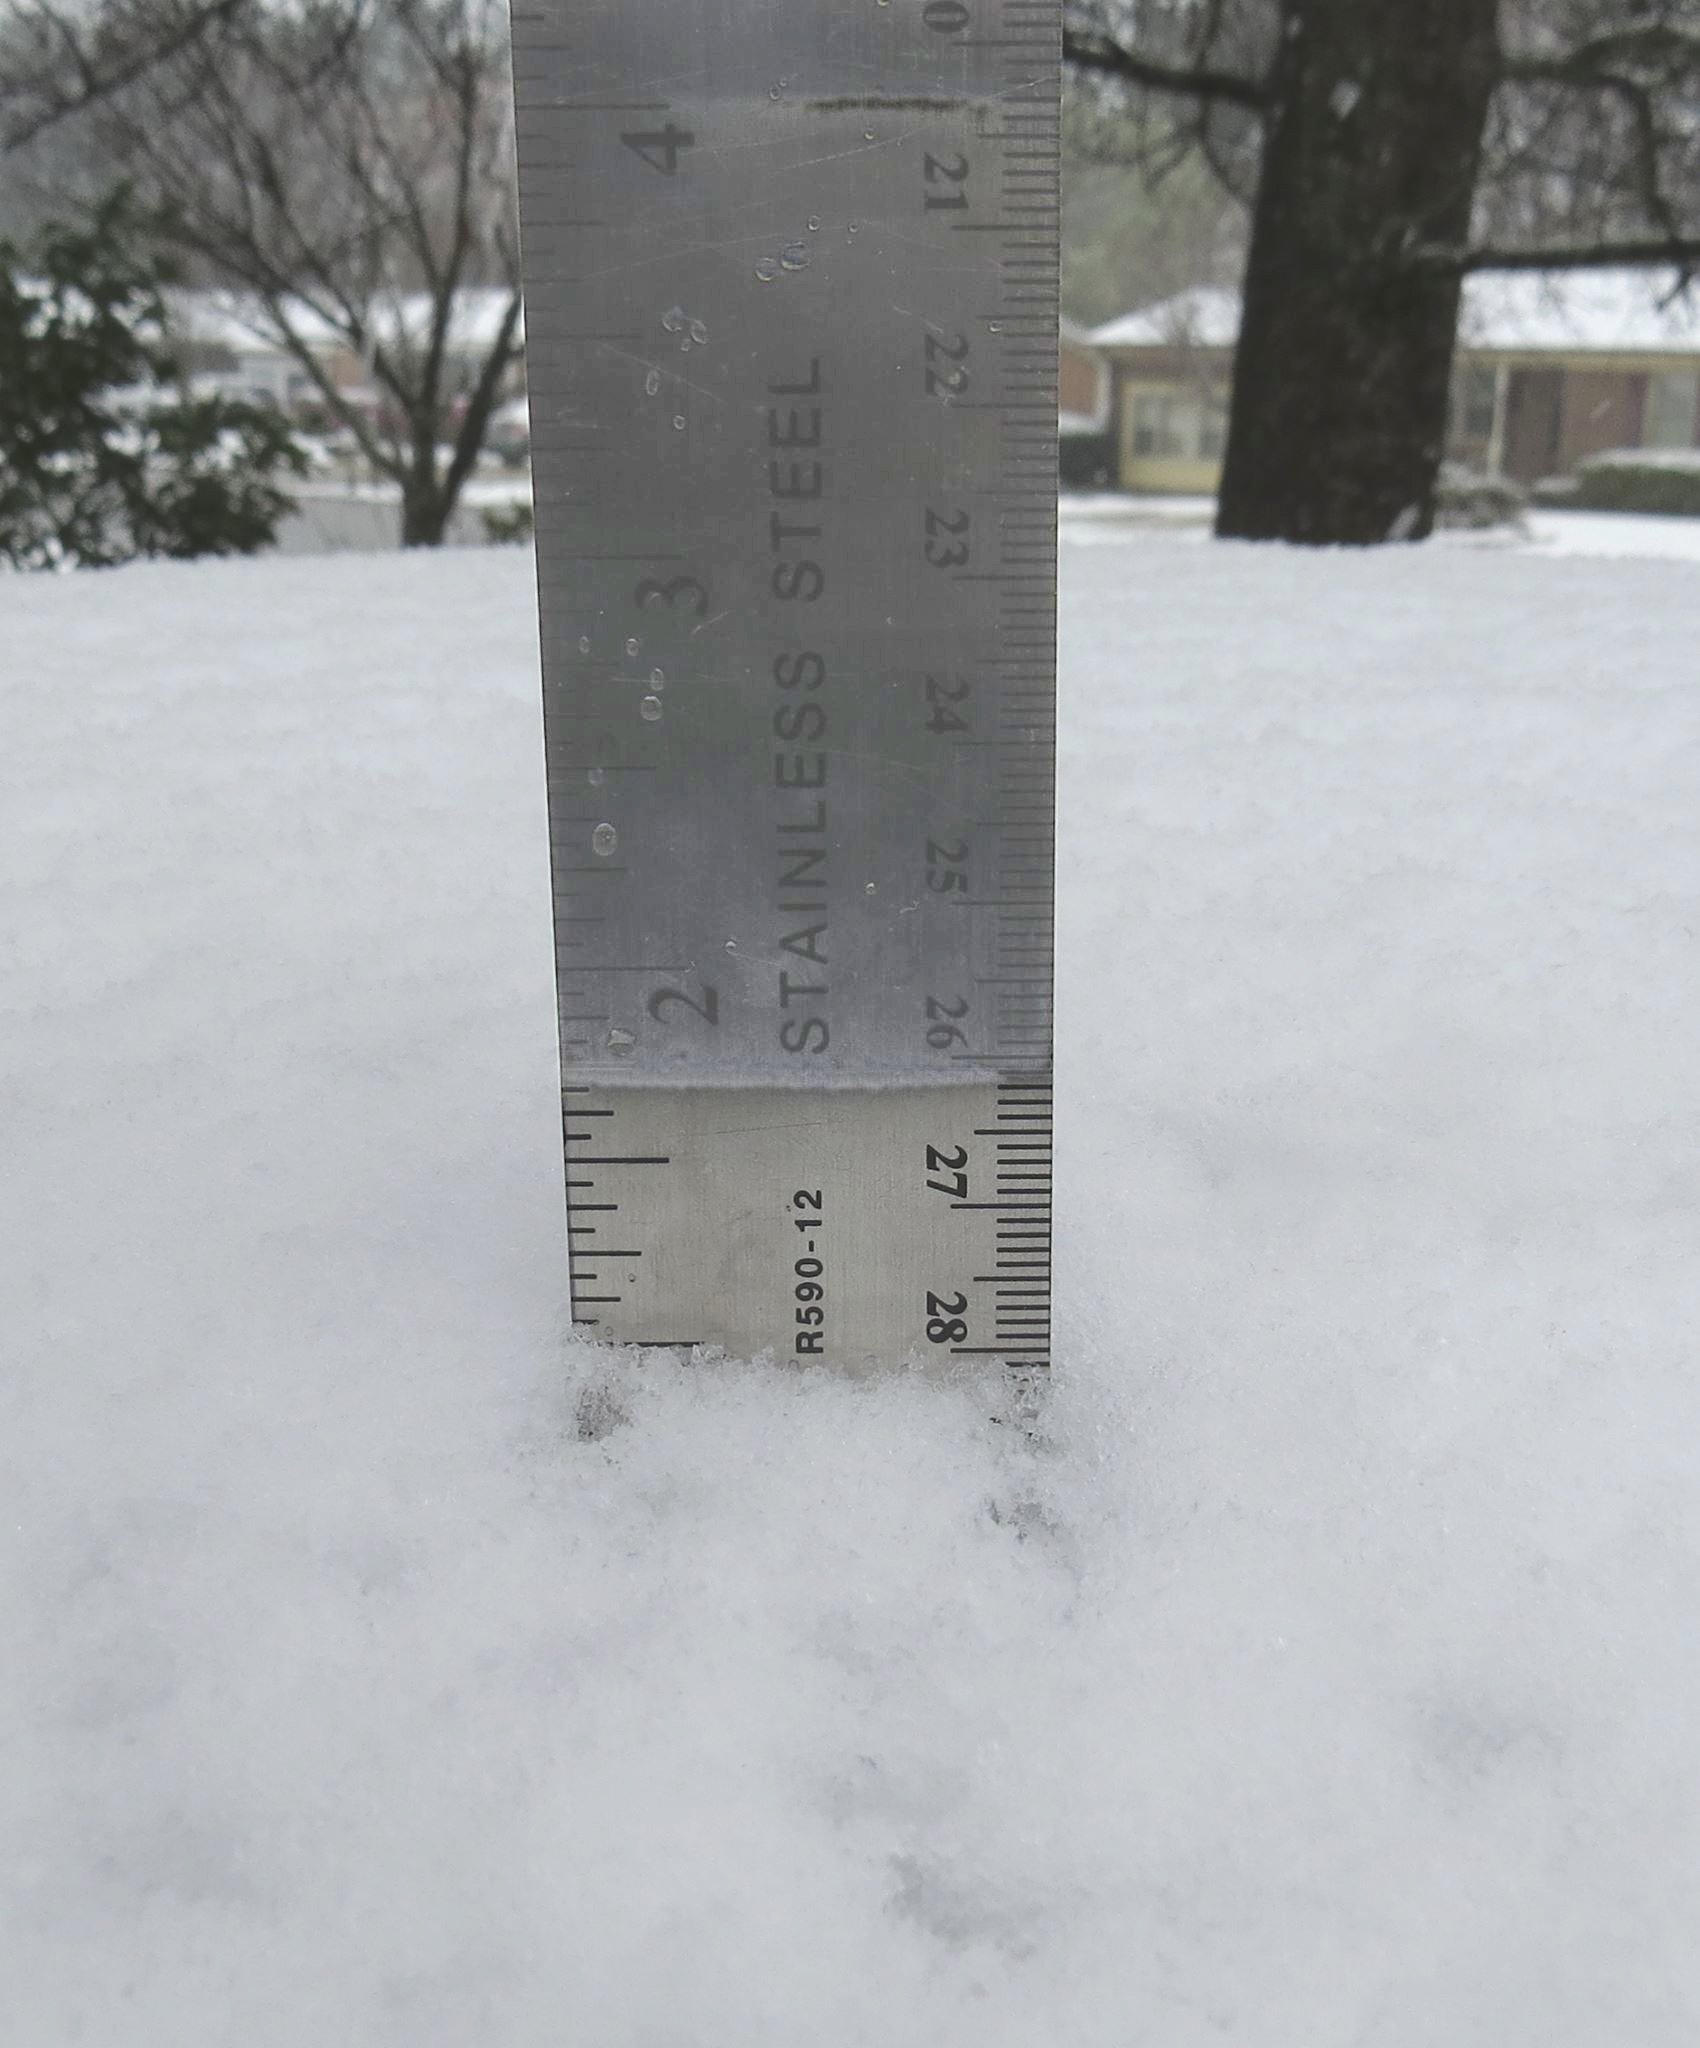 A snow measurement taken around noon in the Kings Grant neighborhood east of Wilmington revealed around one inch of snow had fallen.